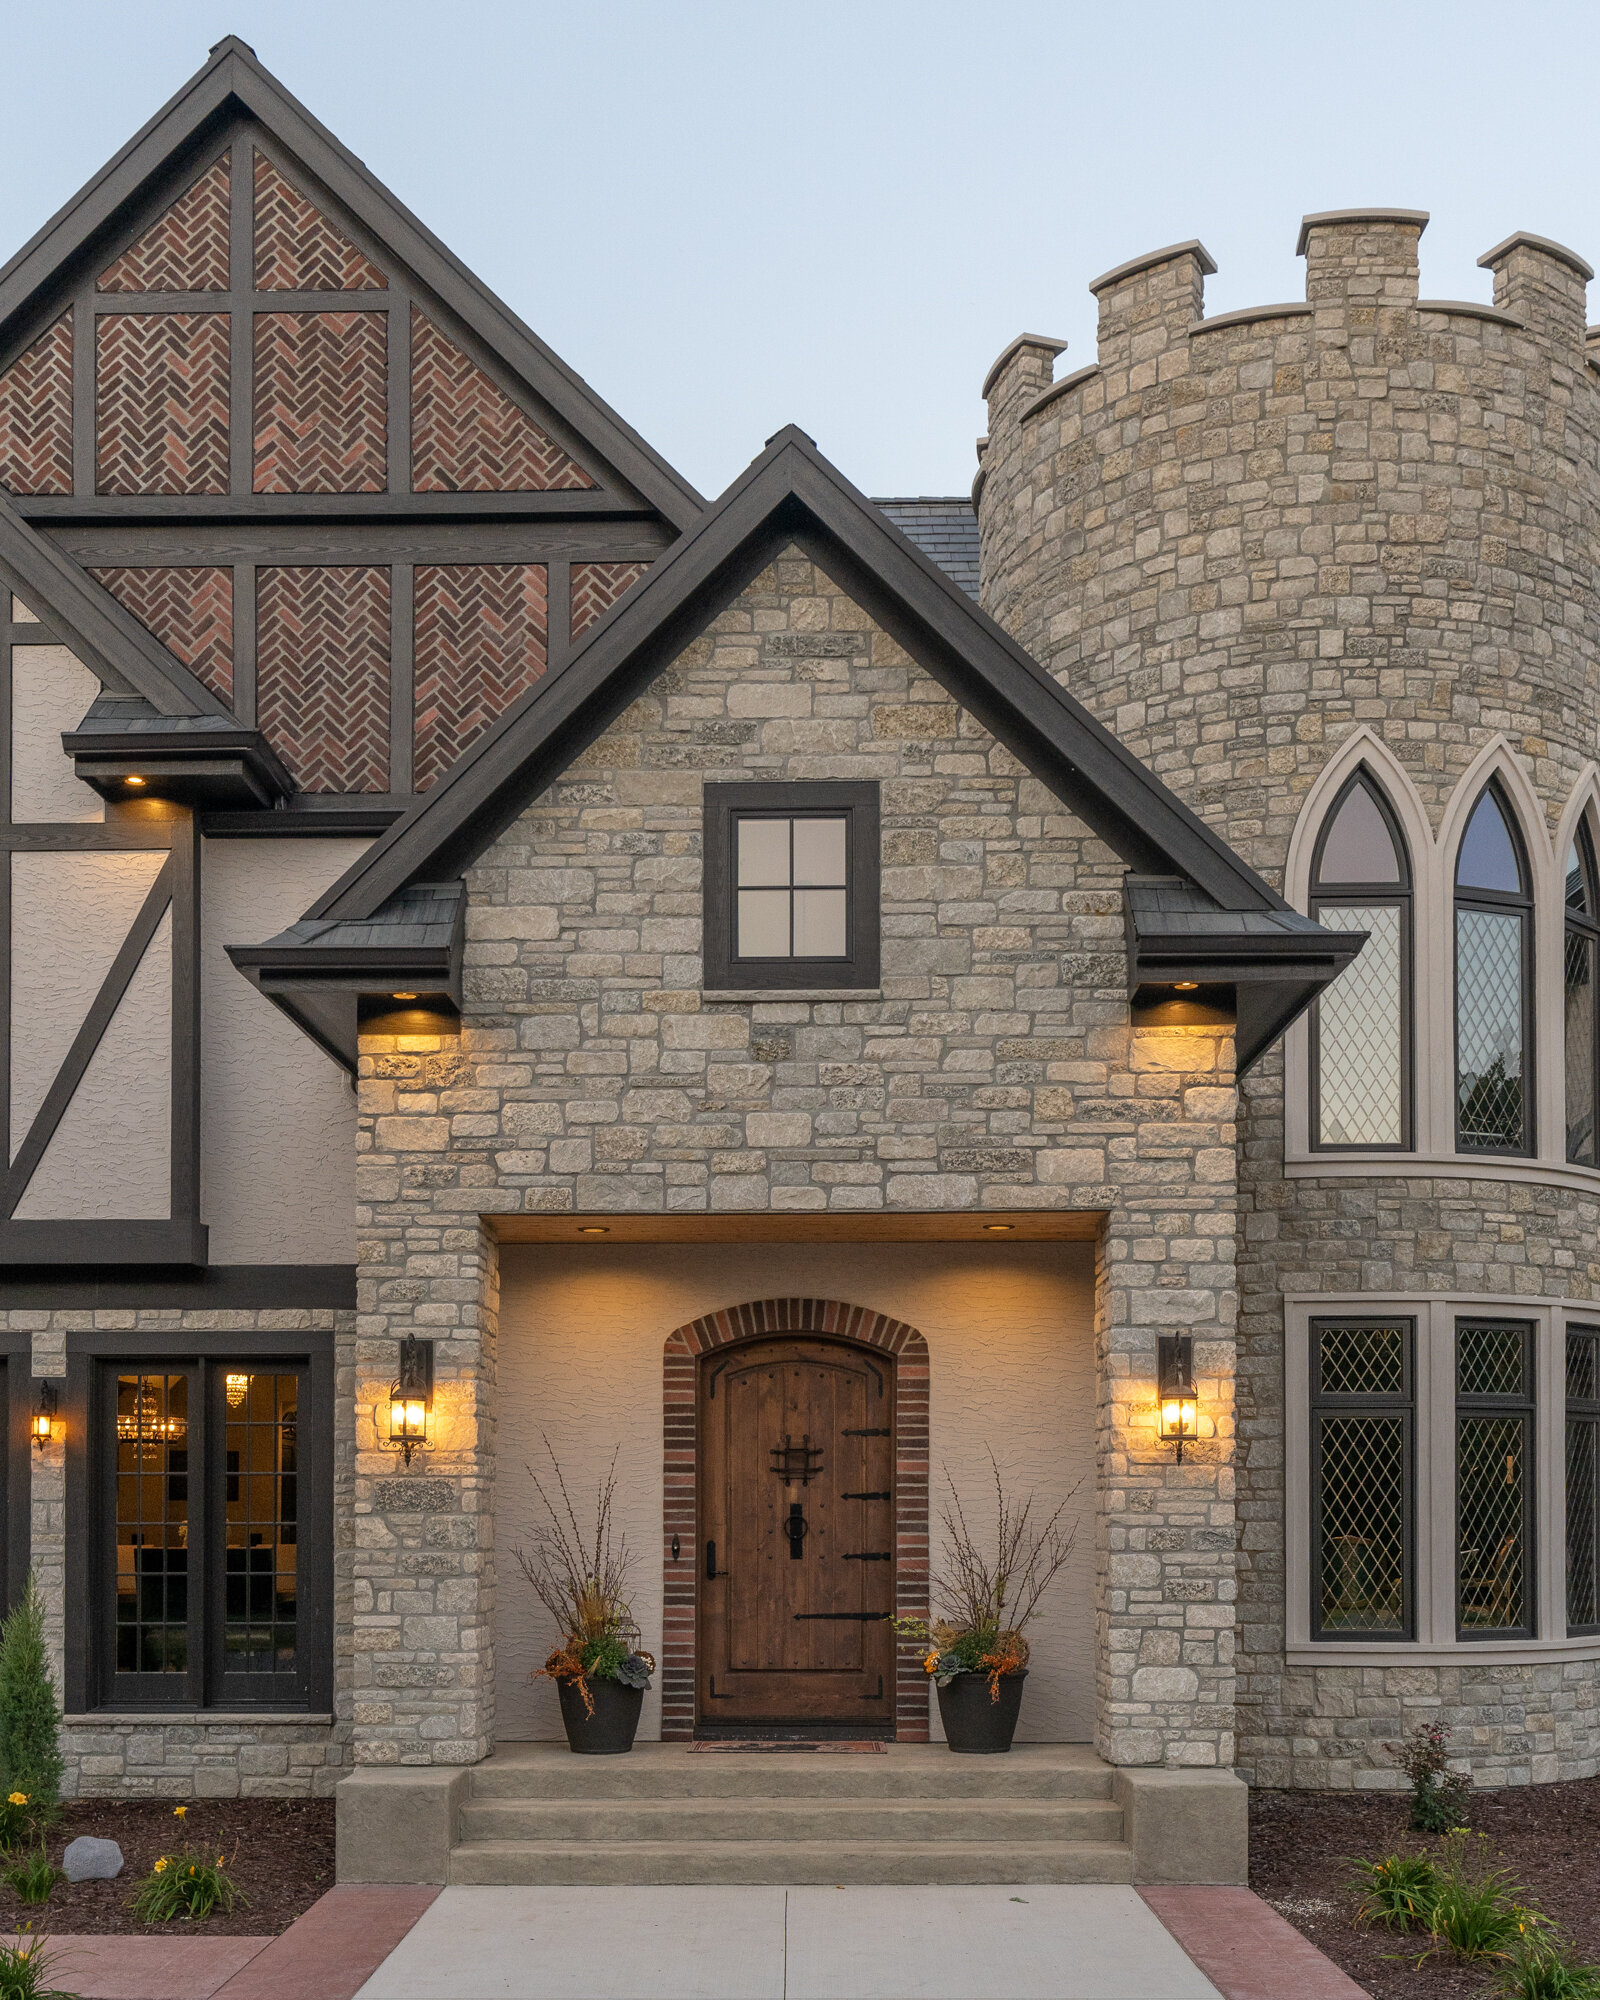 Evening photograph of a stone exterior with turret in Minnesota